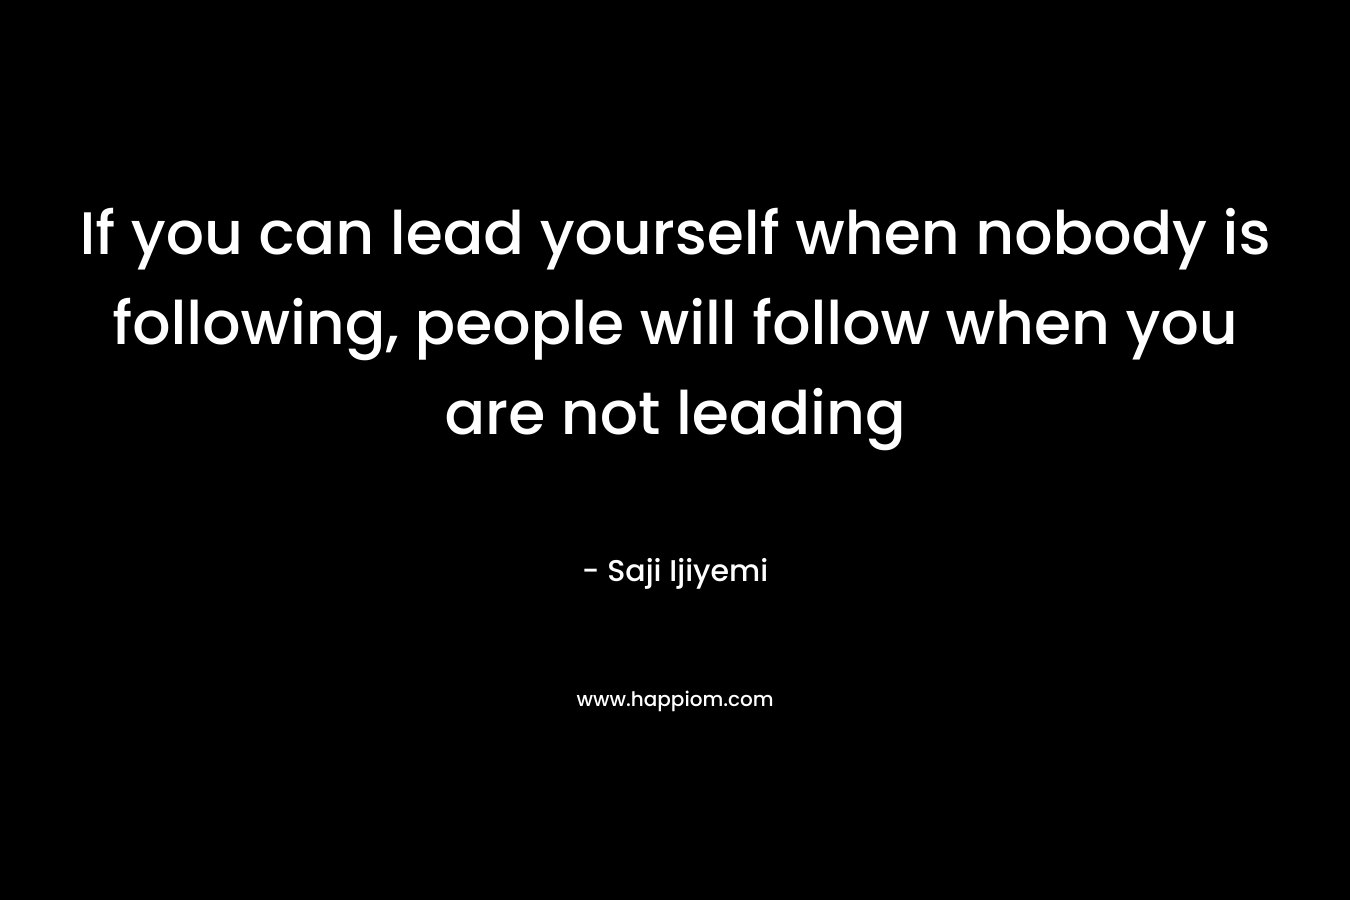 If you can lead yourself when nobody is following, people will follow when you are not leading – Saji Ijiyemi